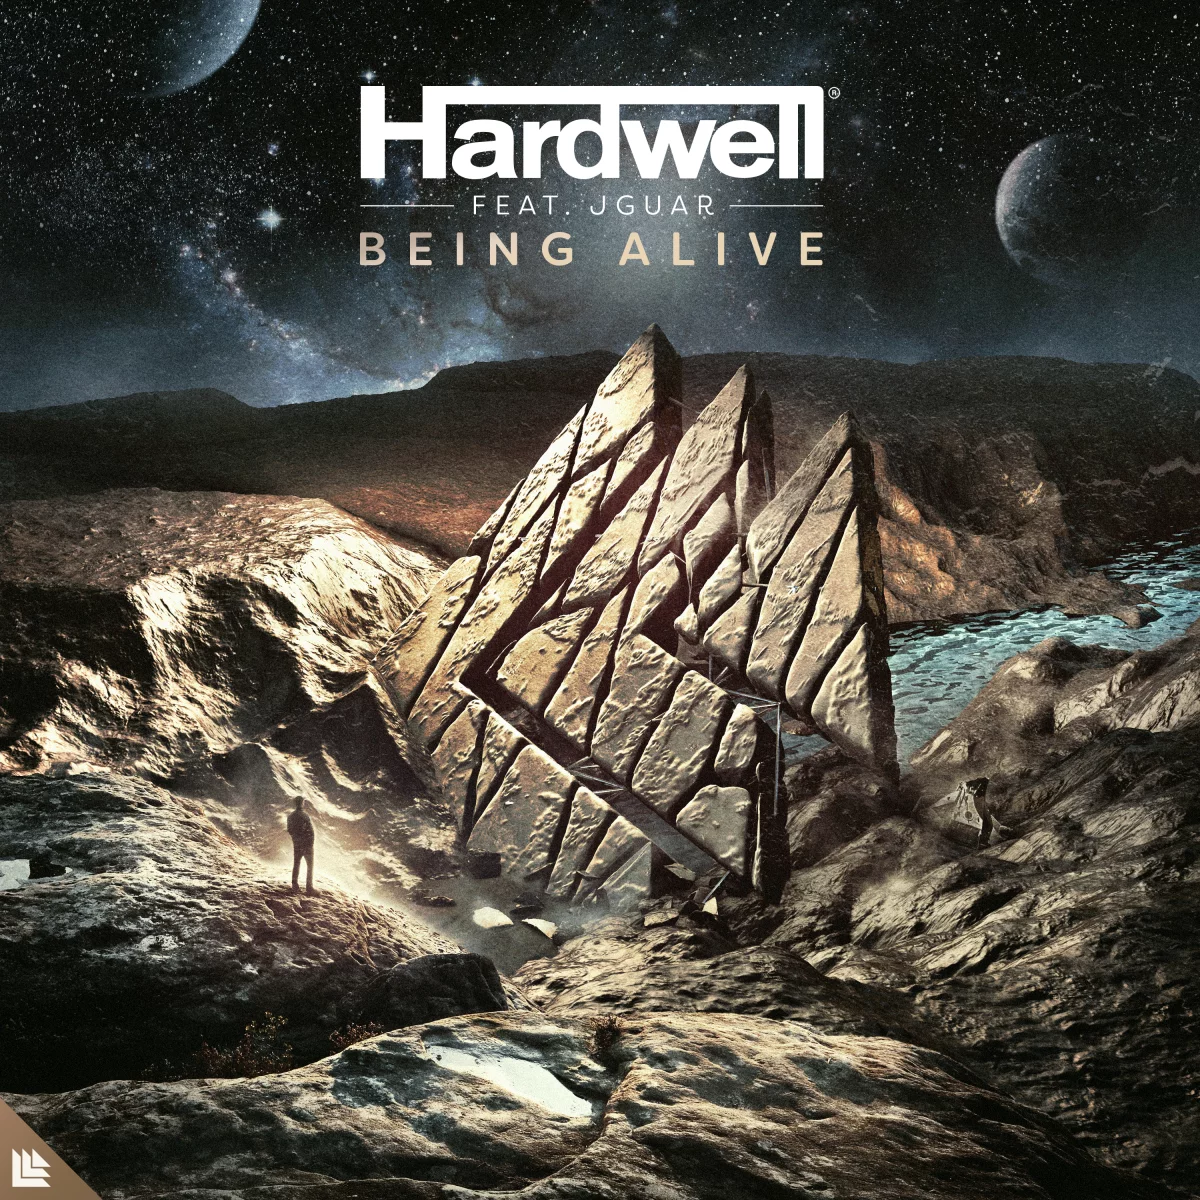 Being Alive - Hardwell⁠ feat. JGUAR⁠